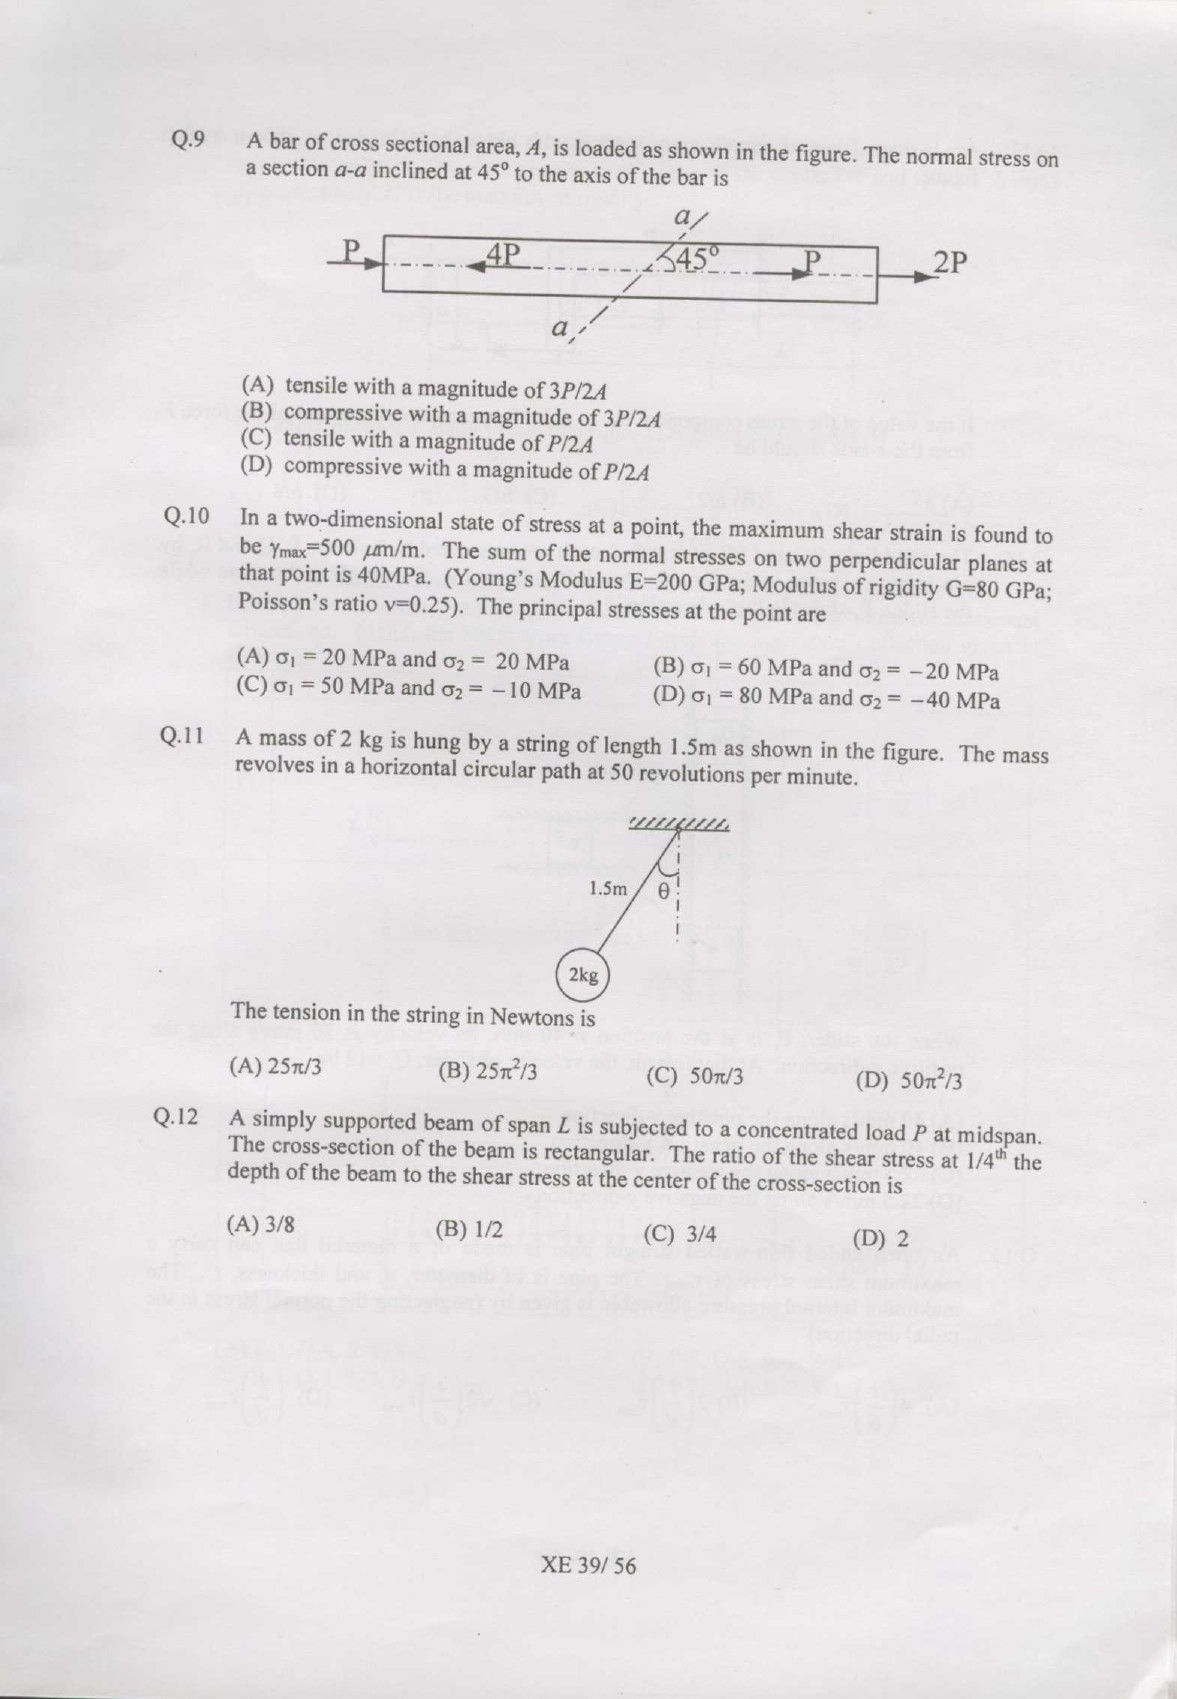 GATE Exam Question Paper 2007 Engineering Sciences 39